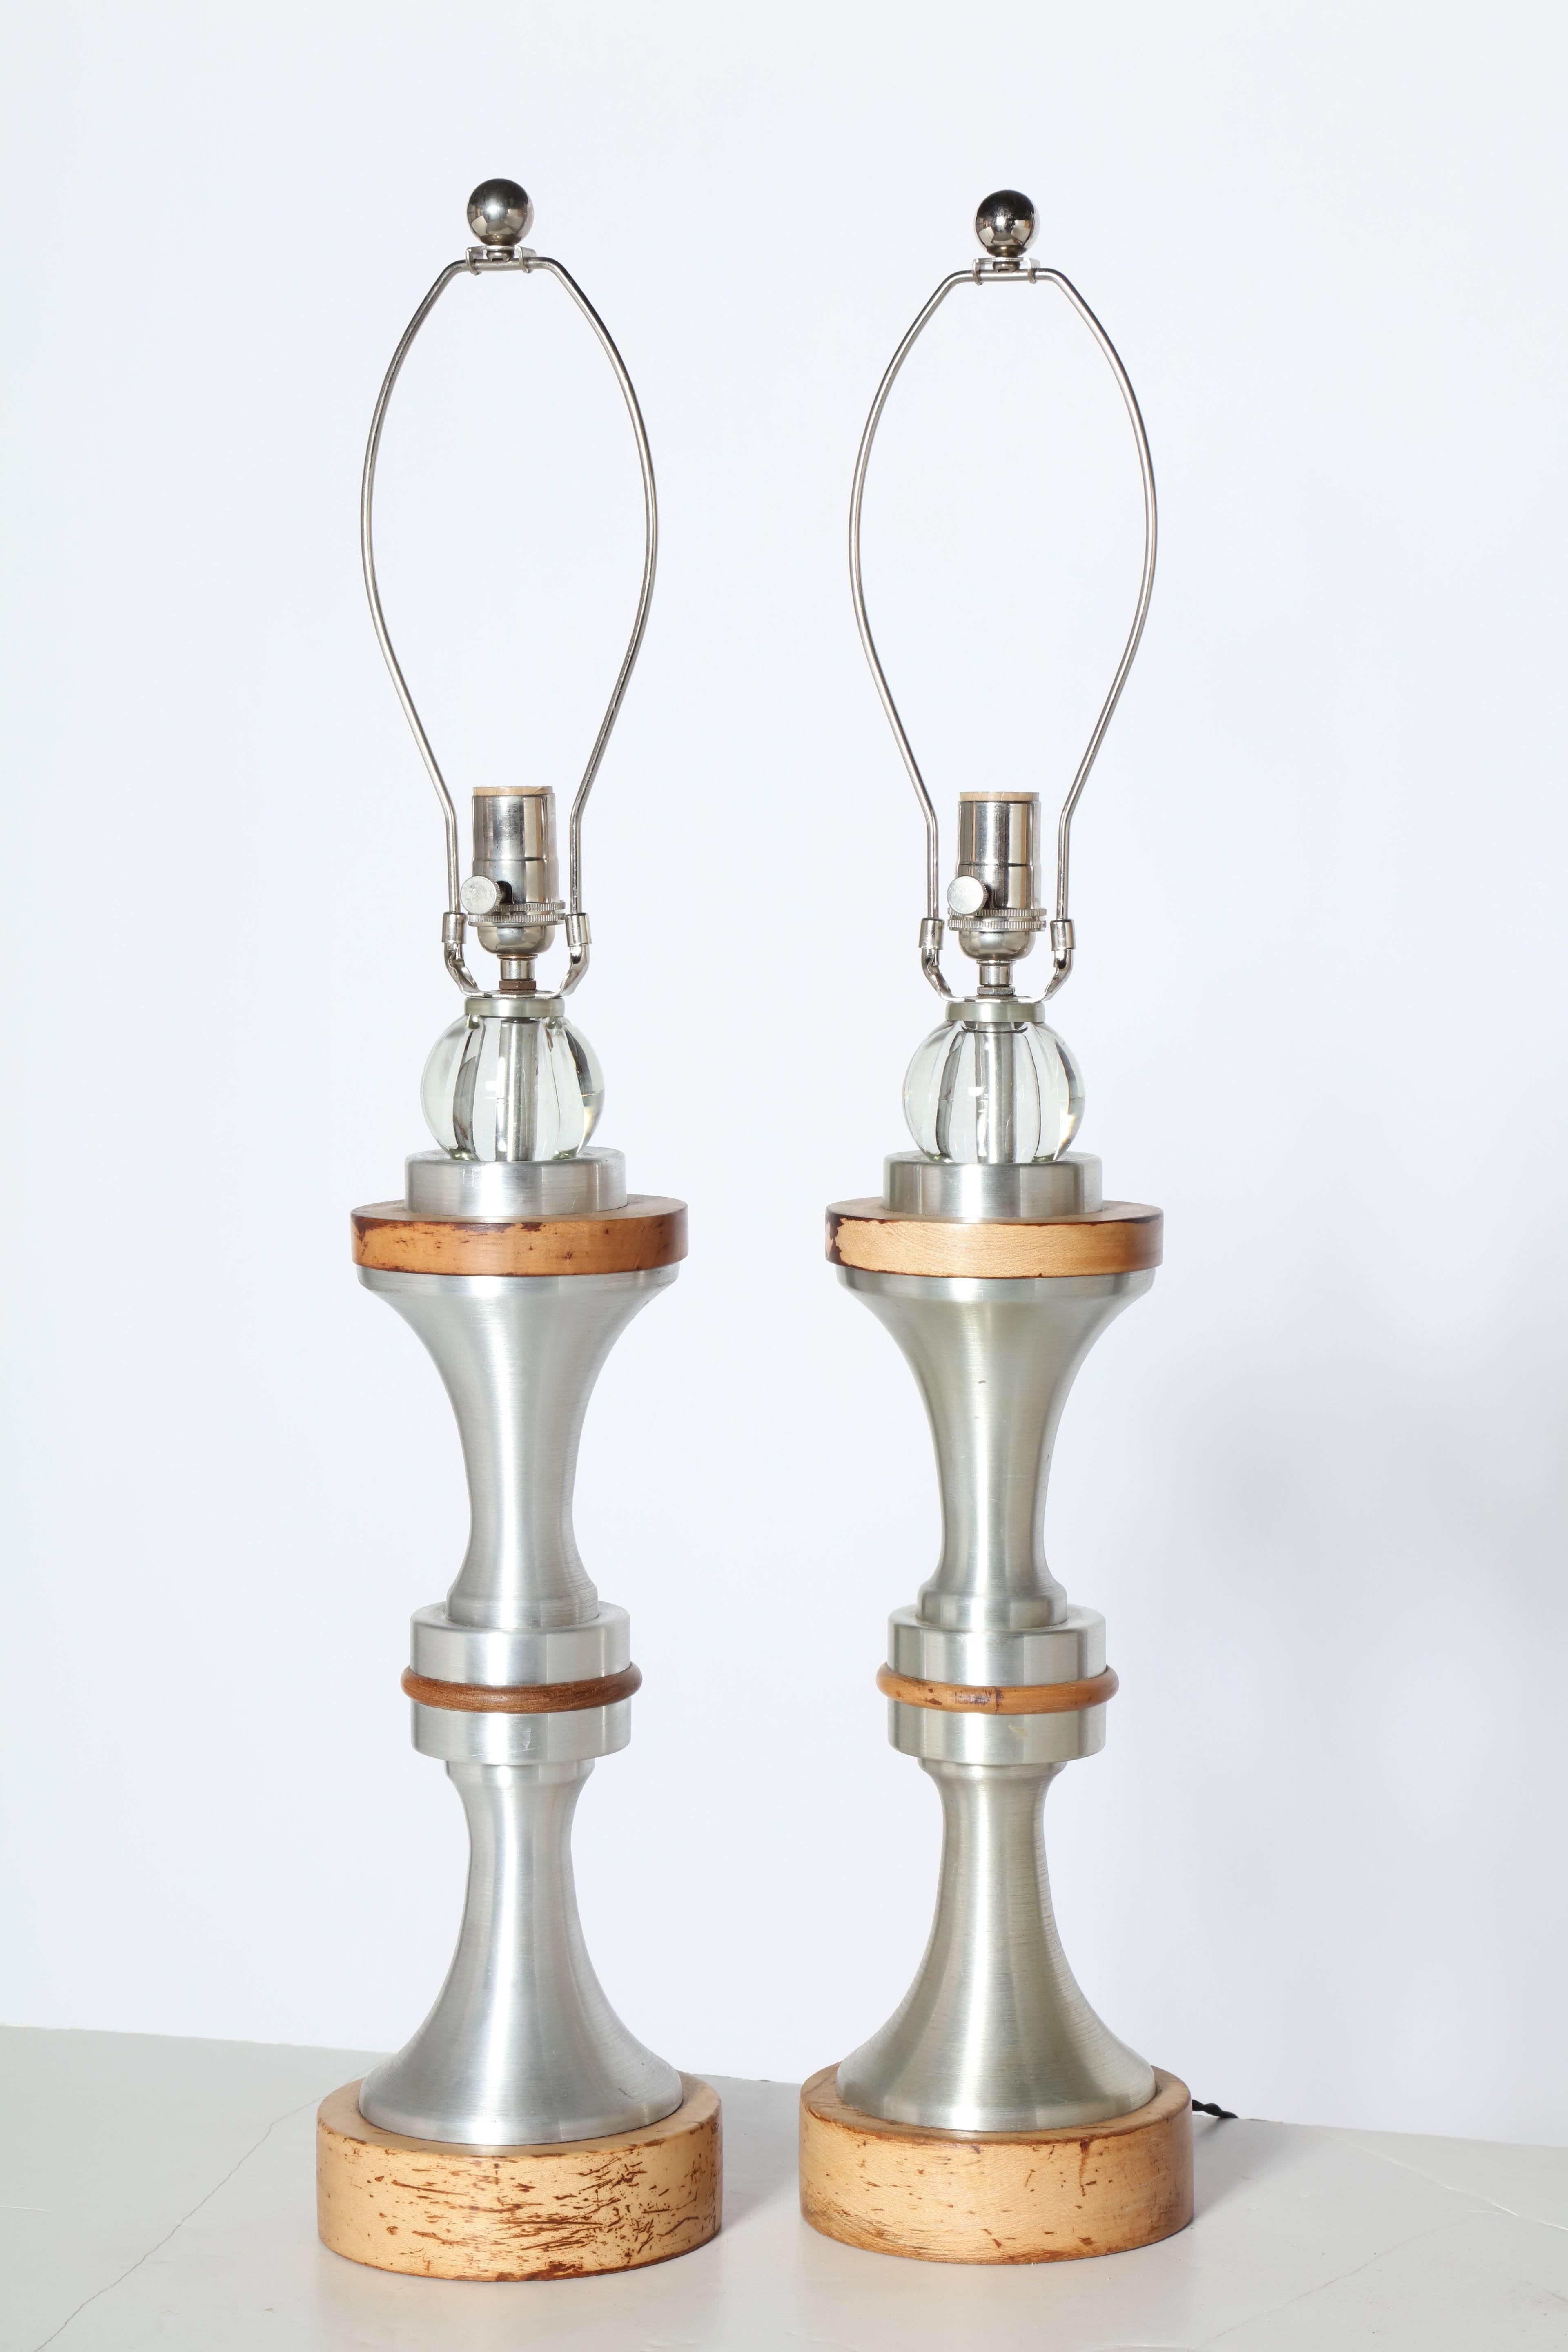 Pair of Mid Century Russel Wright attributed stacked Spun Aluminum, Maple and Crystal Table Lamps. Featuring a machined spun aluminum hourglass form, Maple banded details on circular maple (2H x 6D) base capped with clear crystal balls.